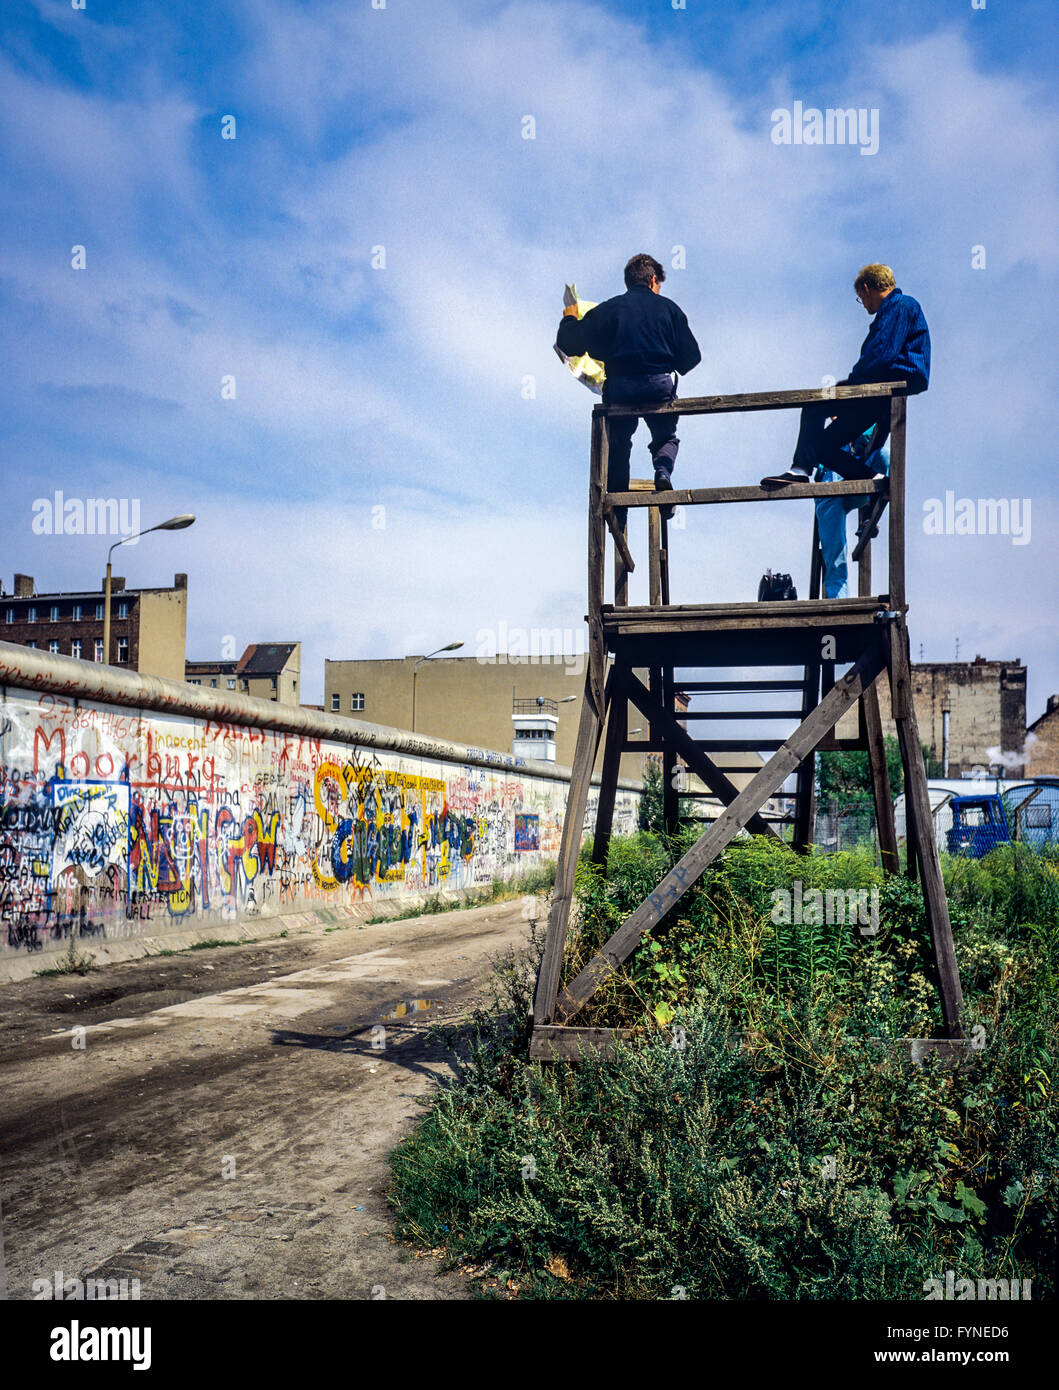 August 1986, Berlin Wall graffitis, people on observation platform looking over the Wall, Zimmerstrasse street, West Berlin side, Germany, Europe, Stock Photo